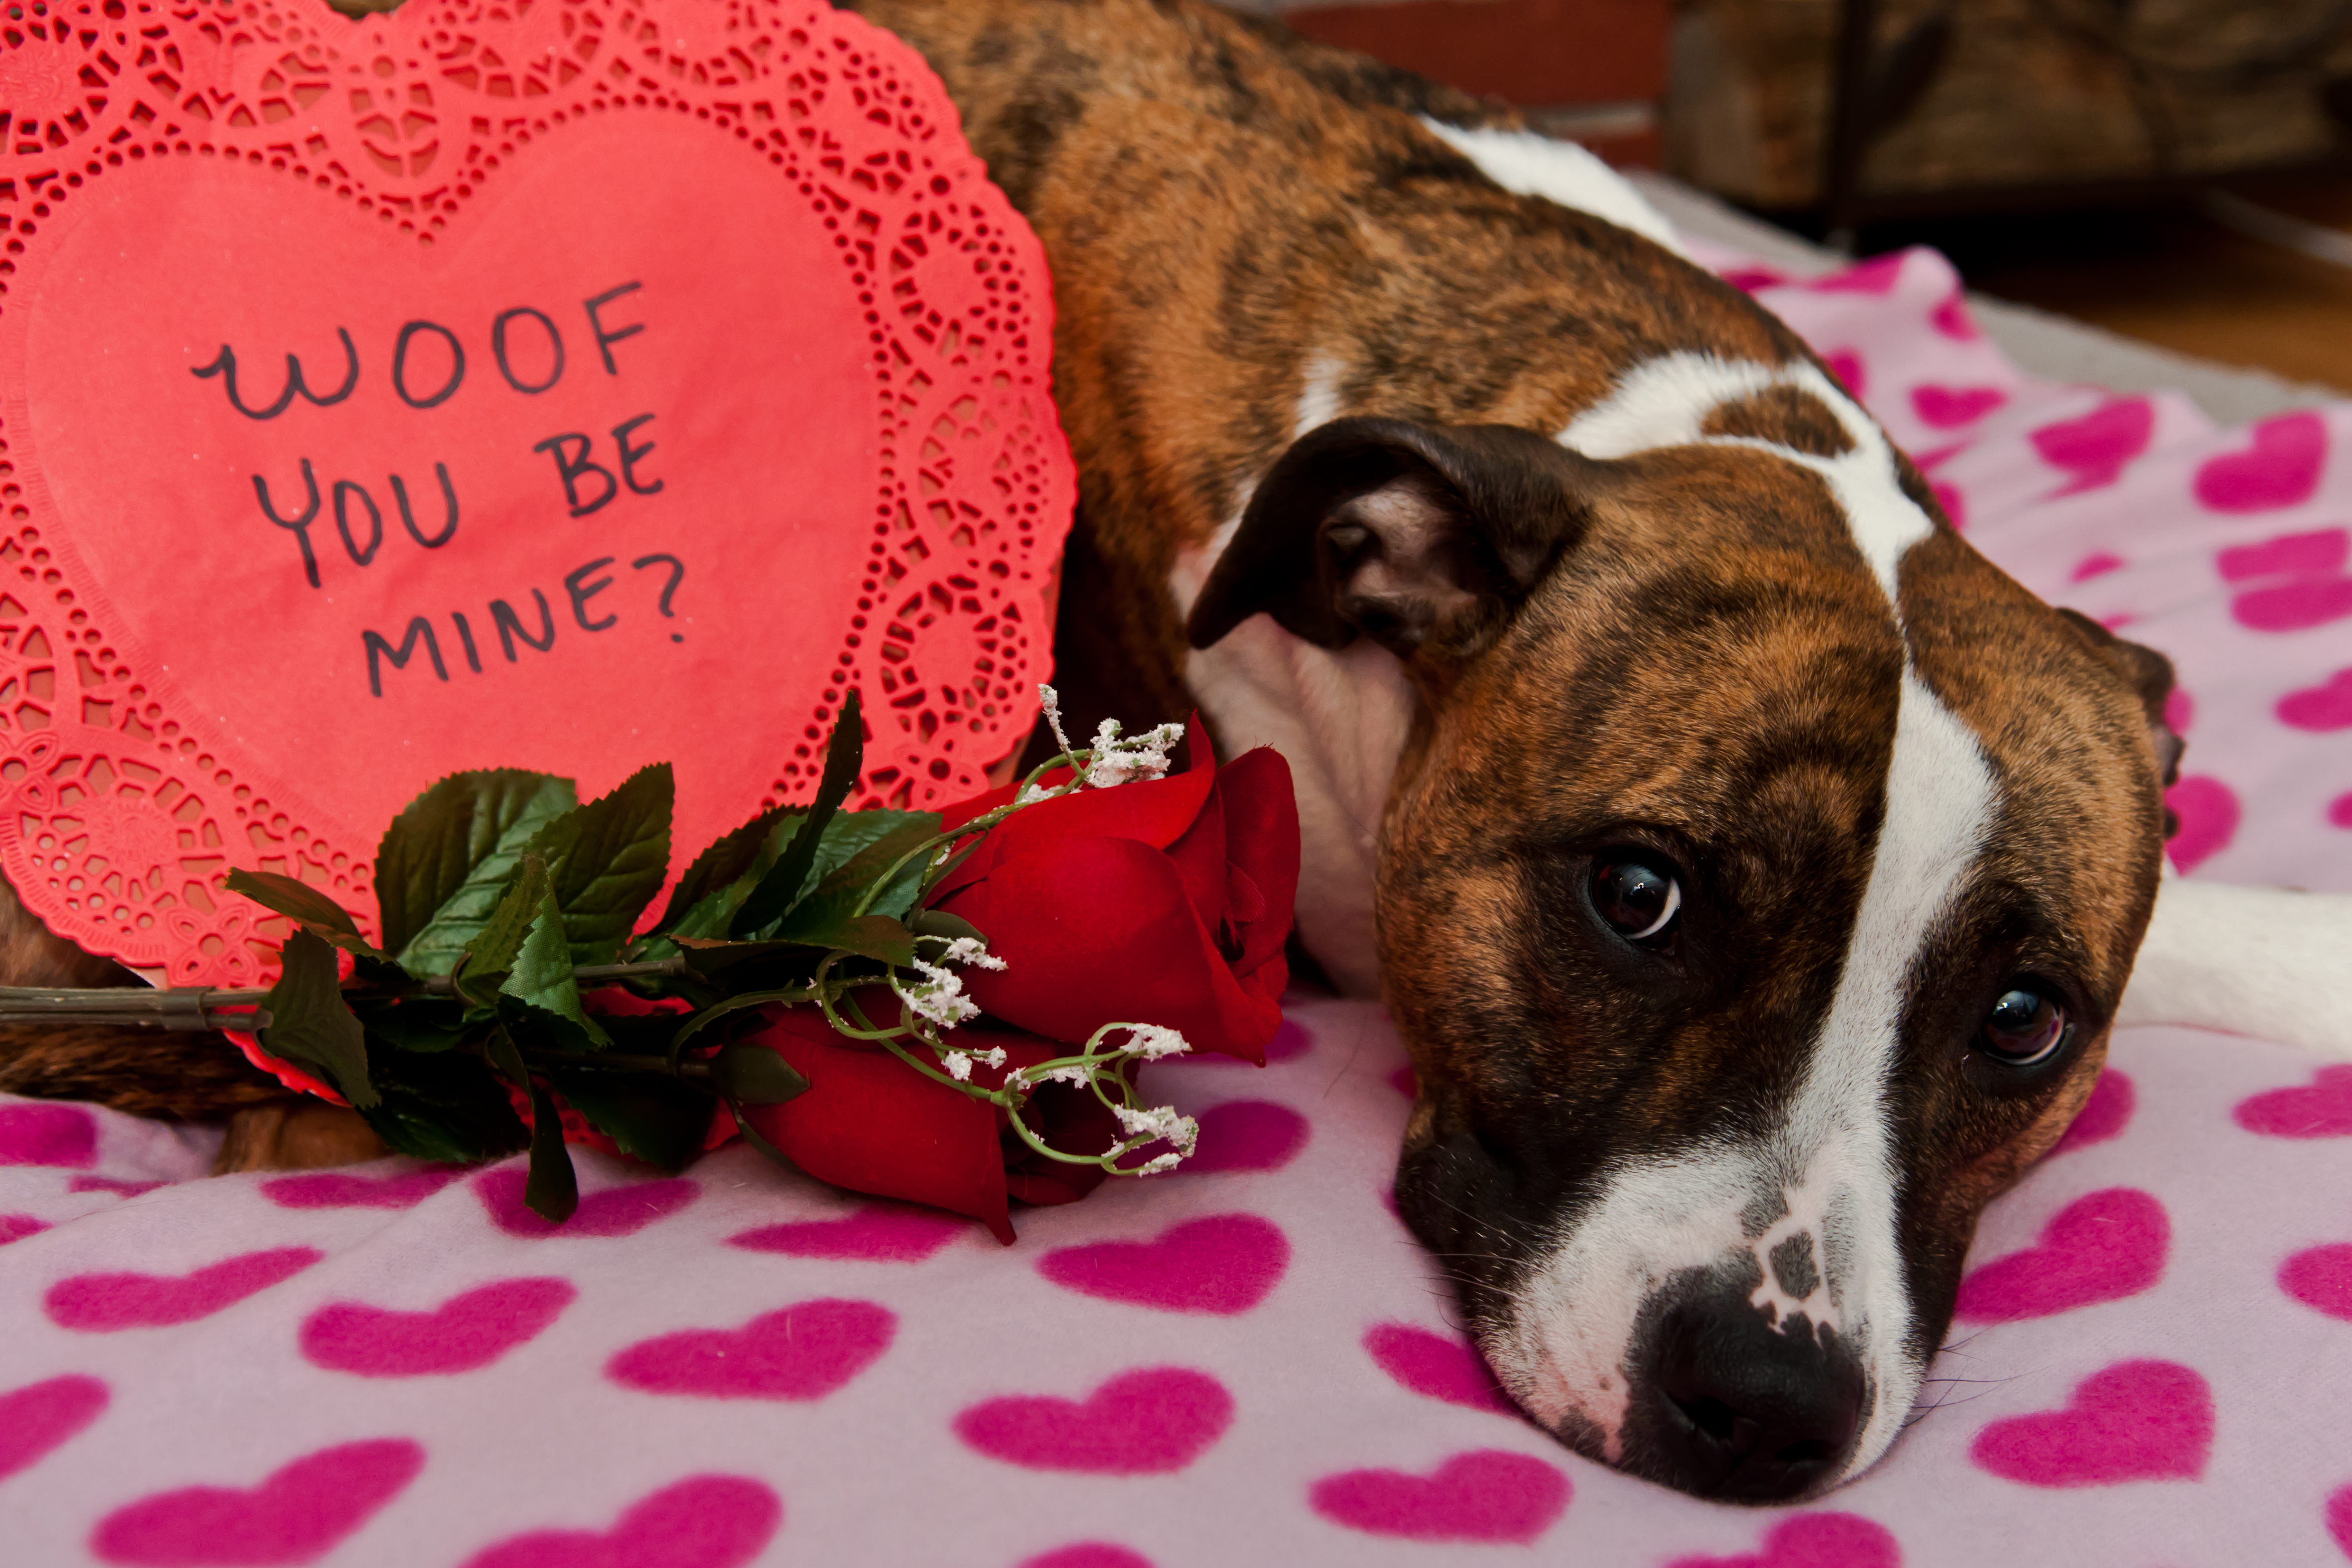 Which Pet-Friendly Flowers Should I Buy This Valentine's Day?